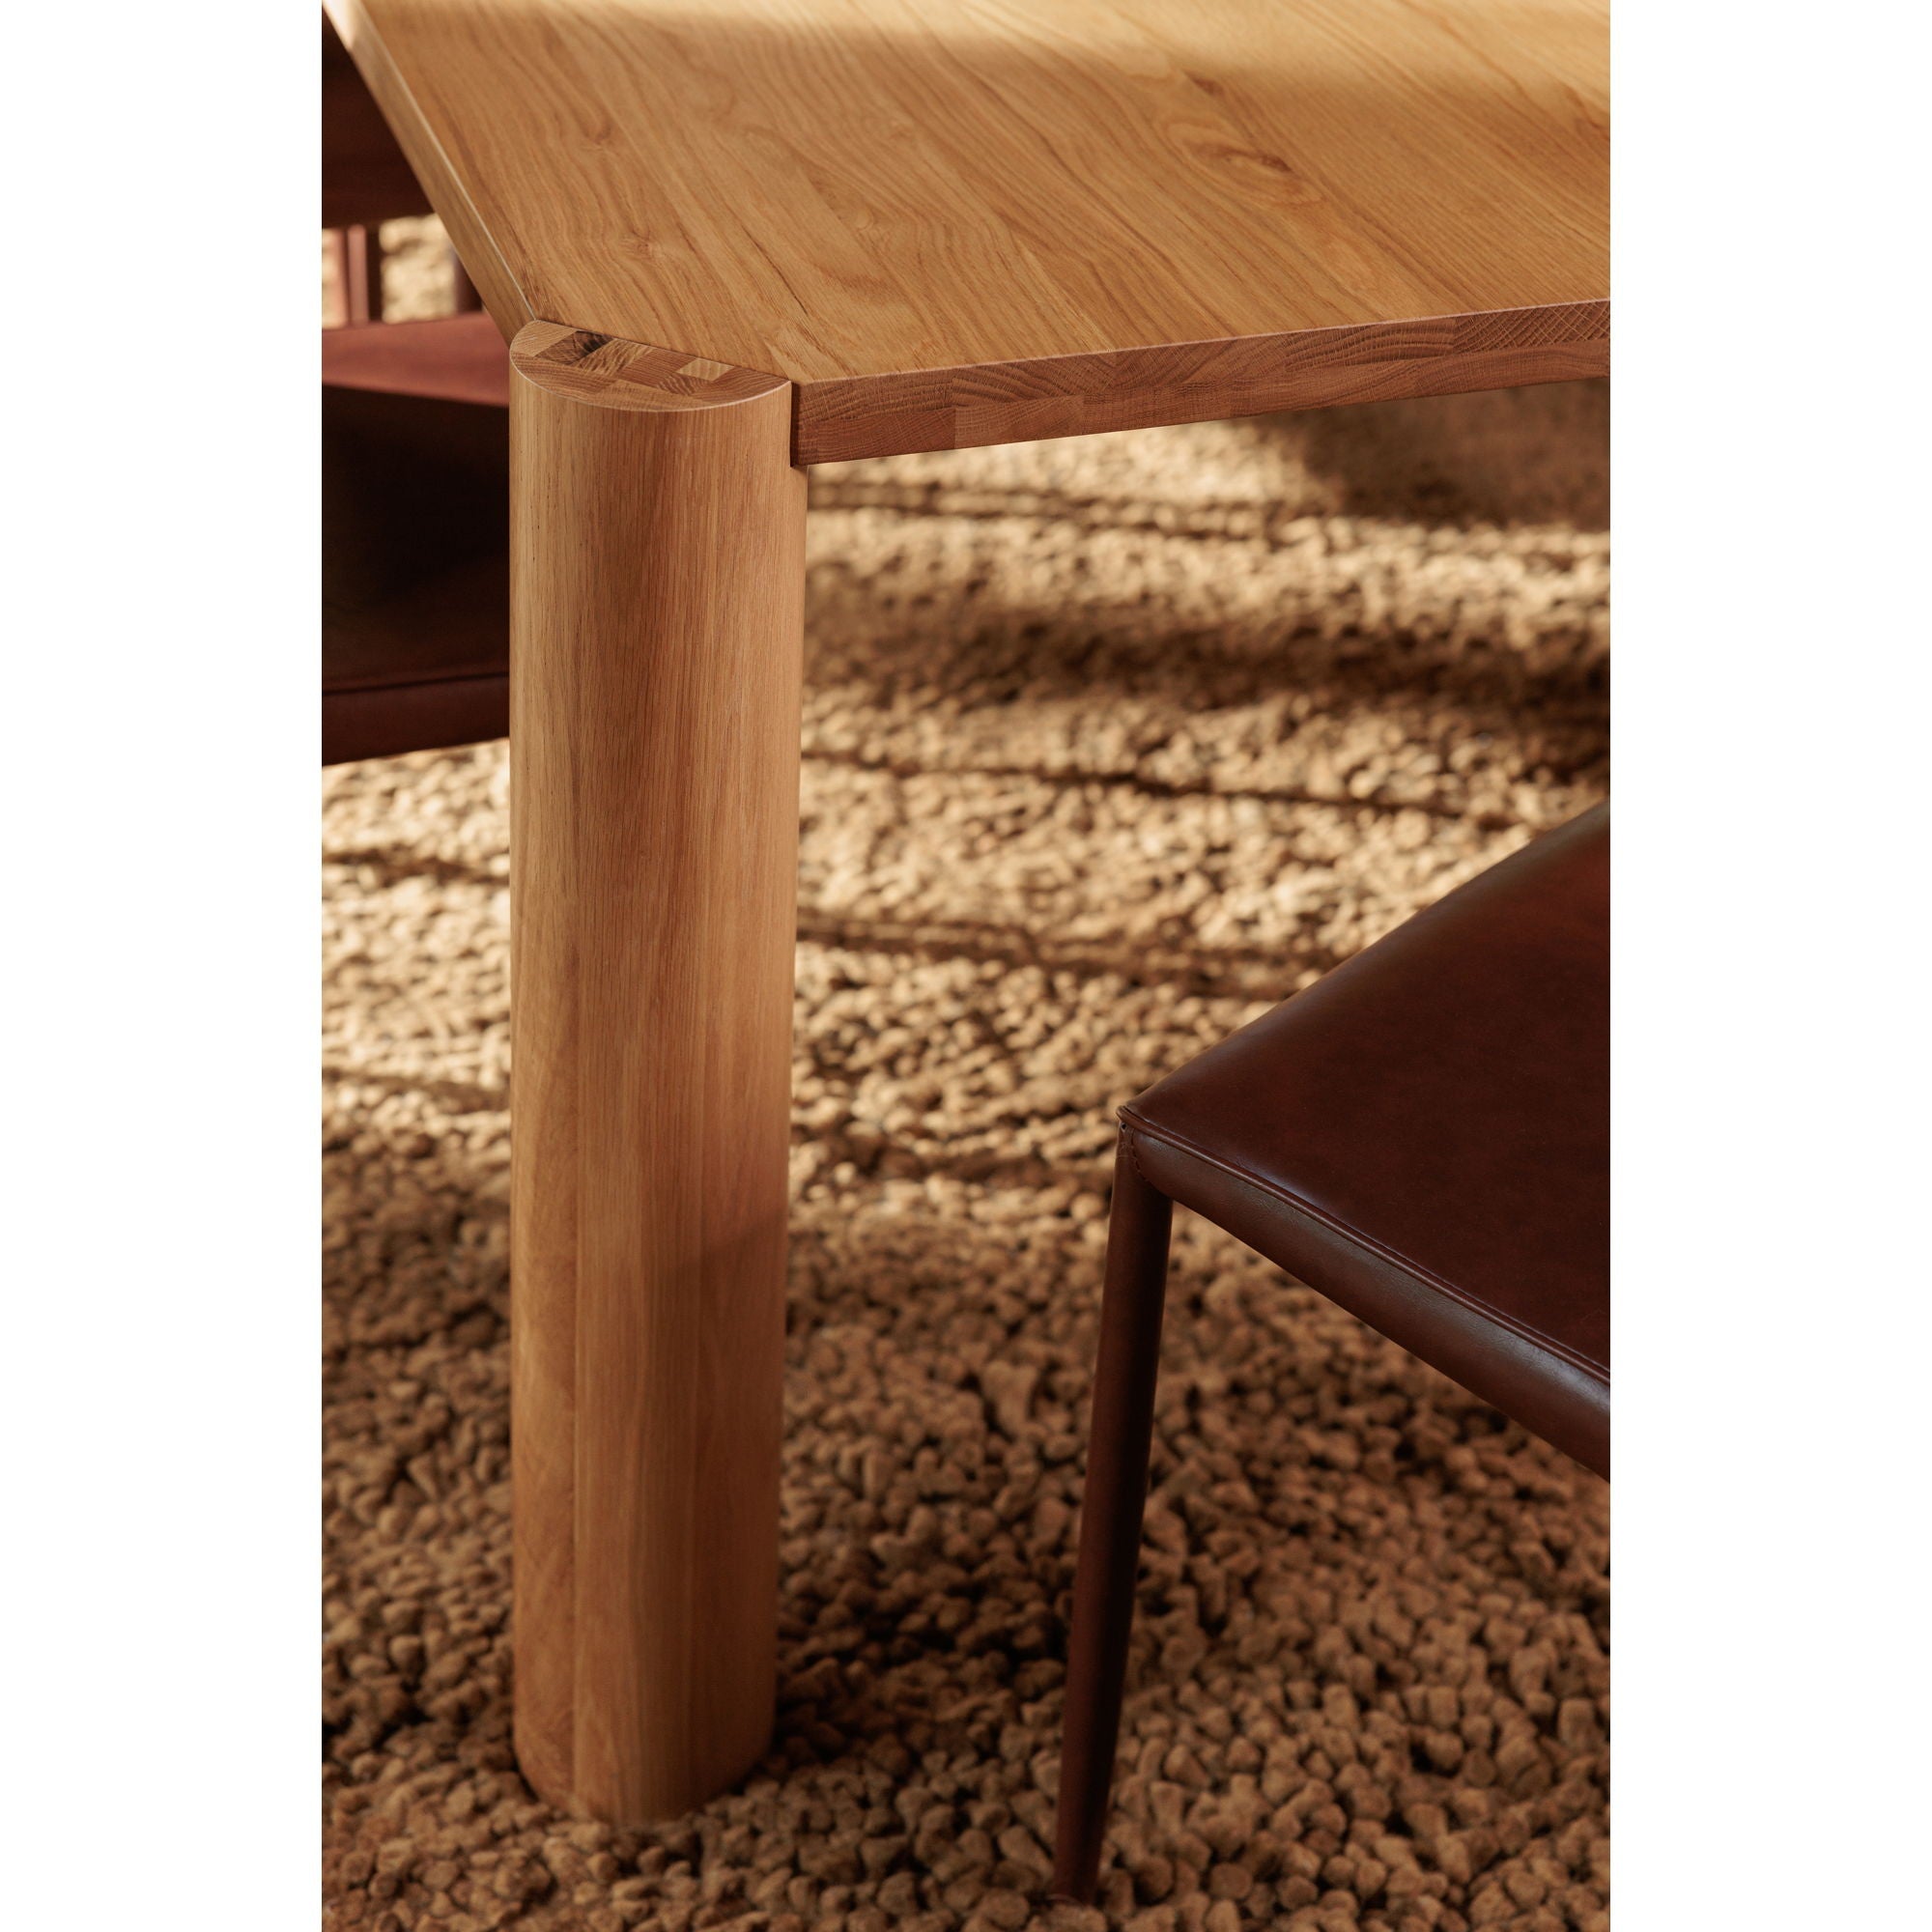 Post - Dining Table Small - Natural